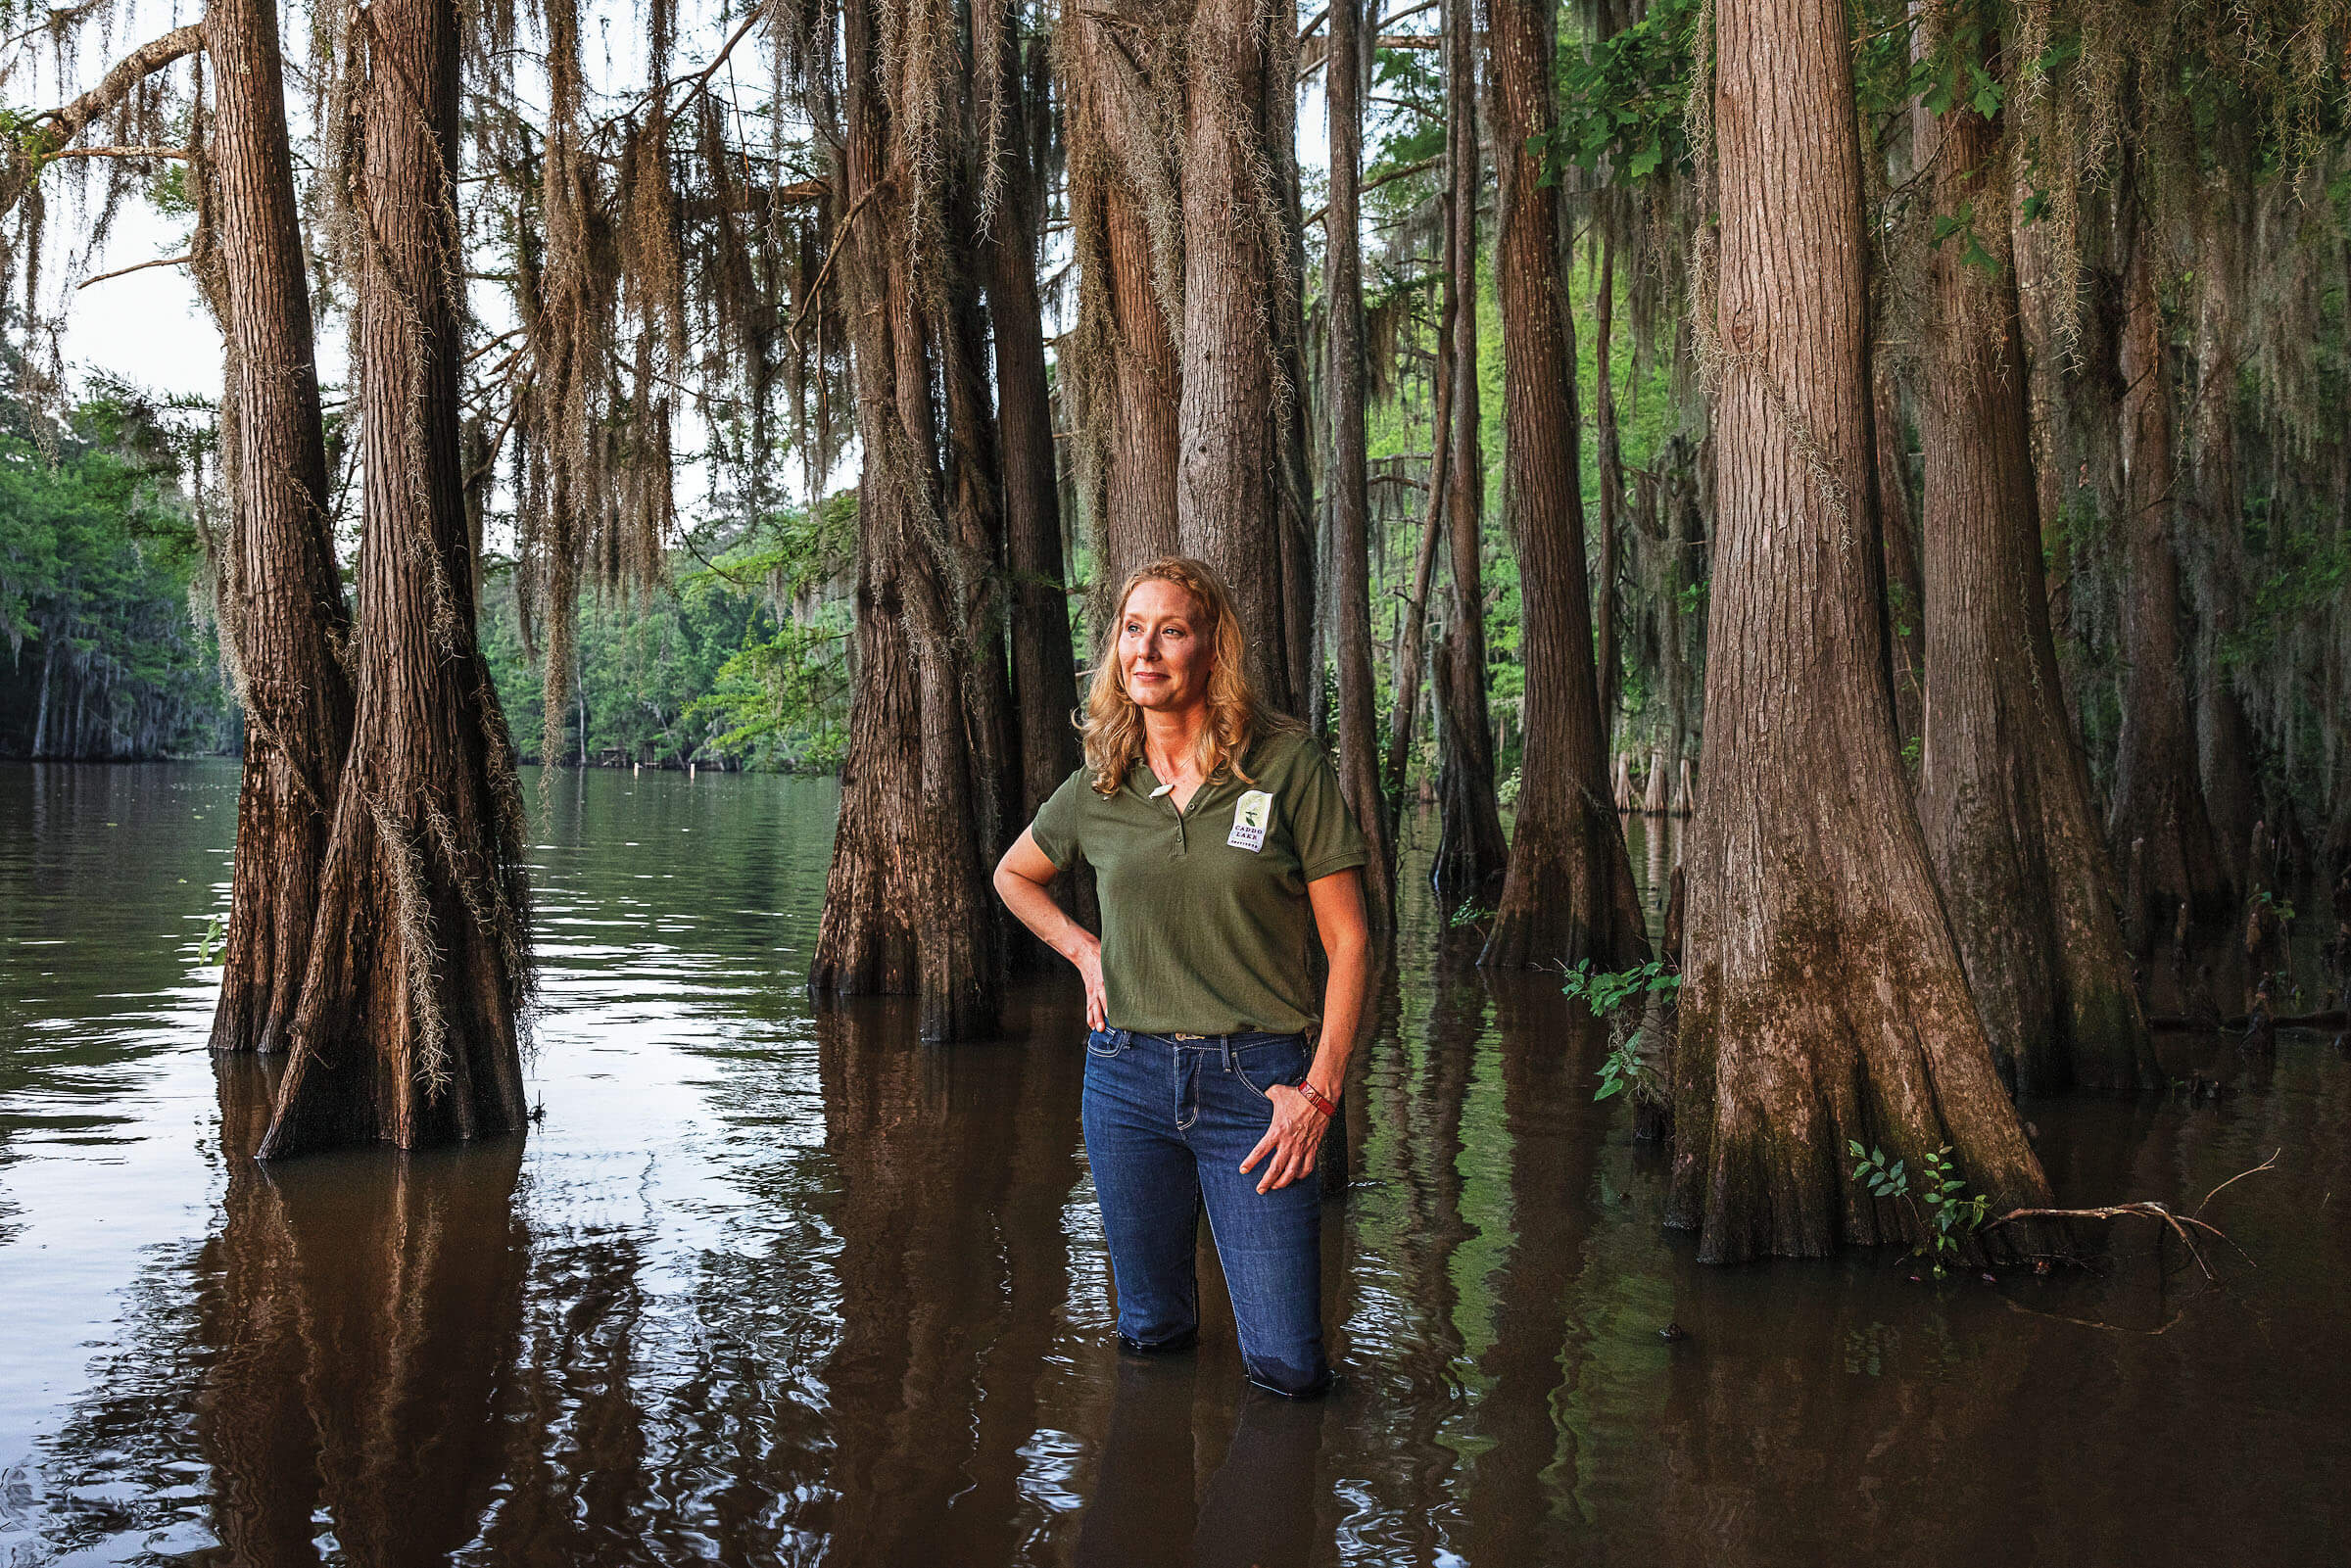 A person in a green shirt and jeans stands in the water beneath large trees